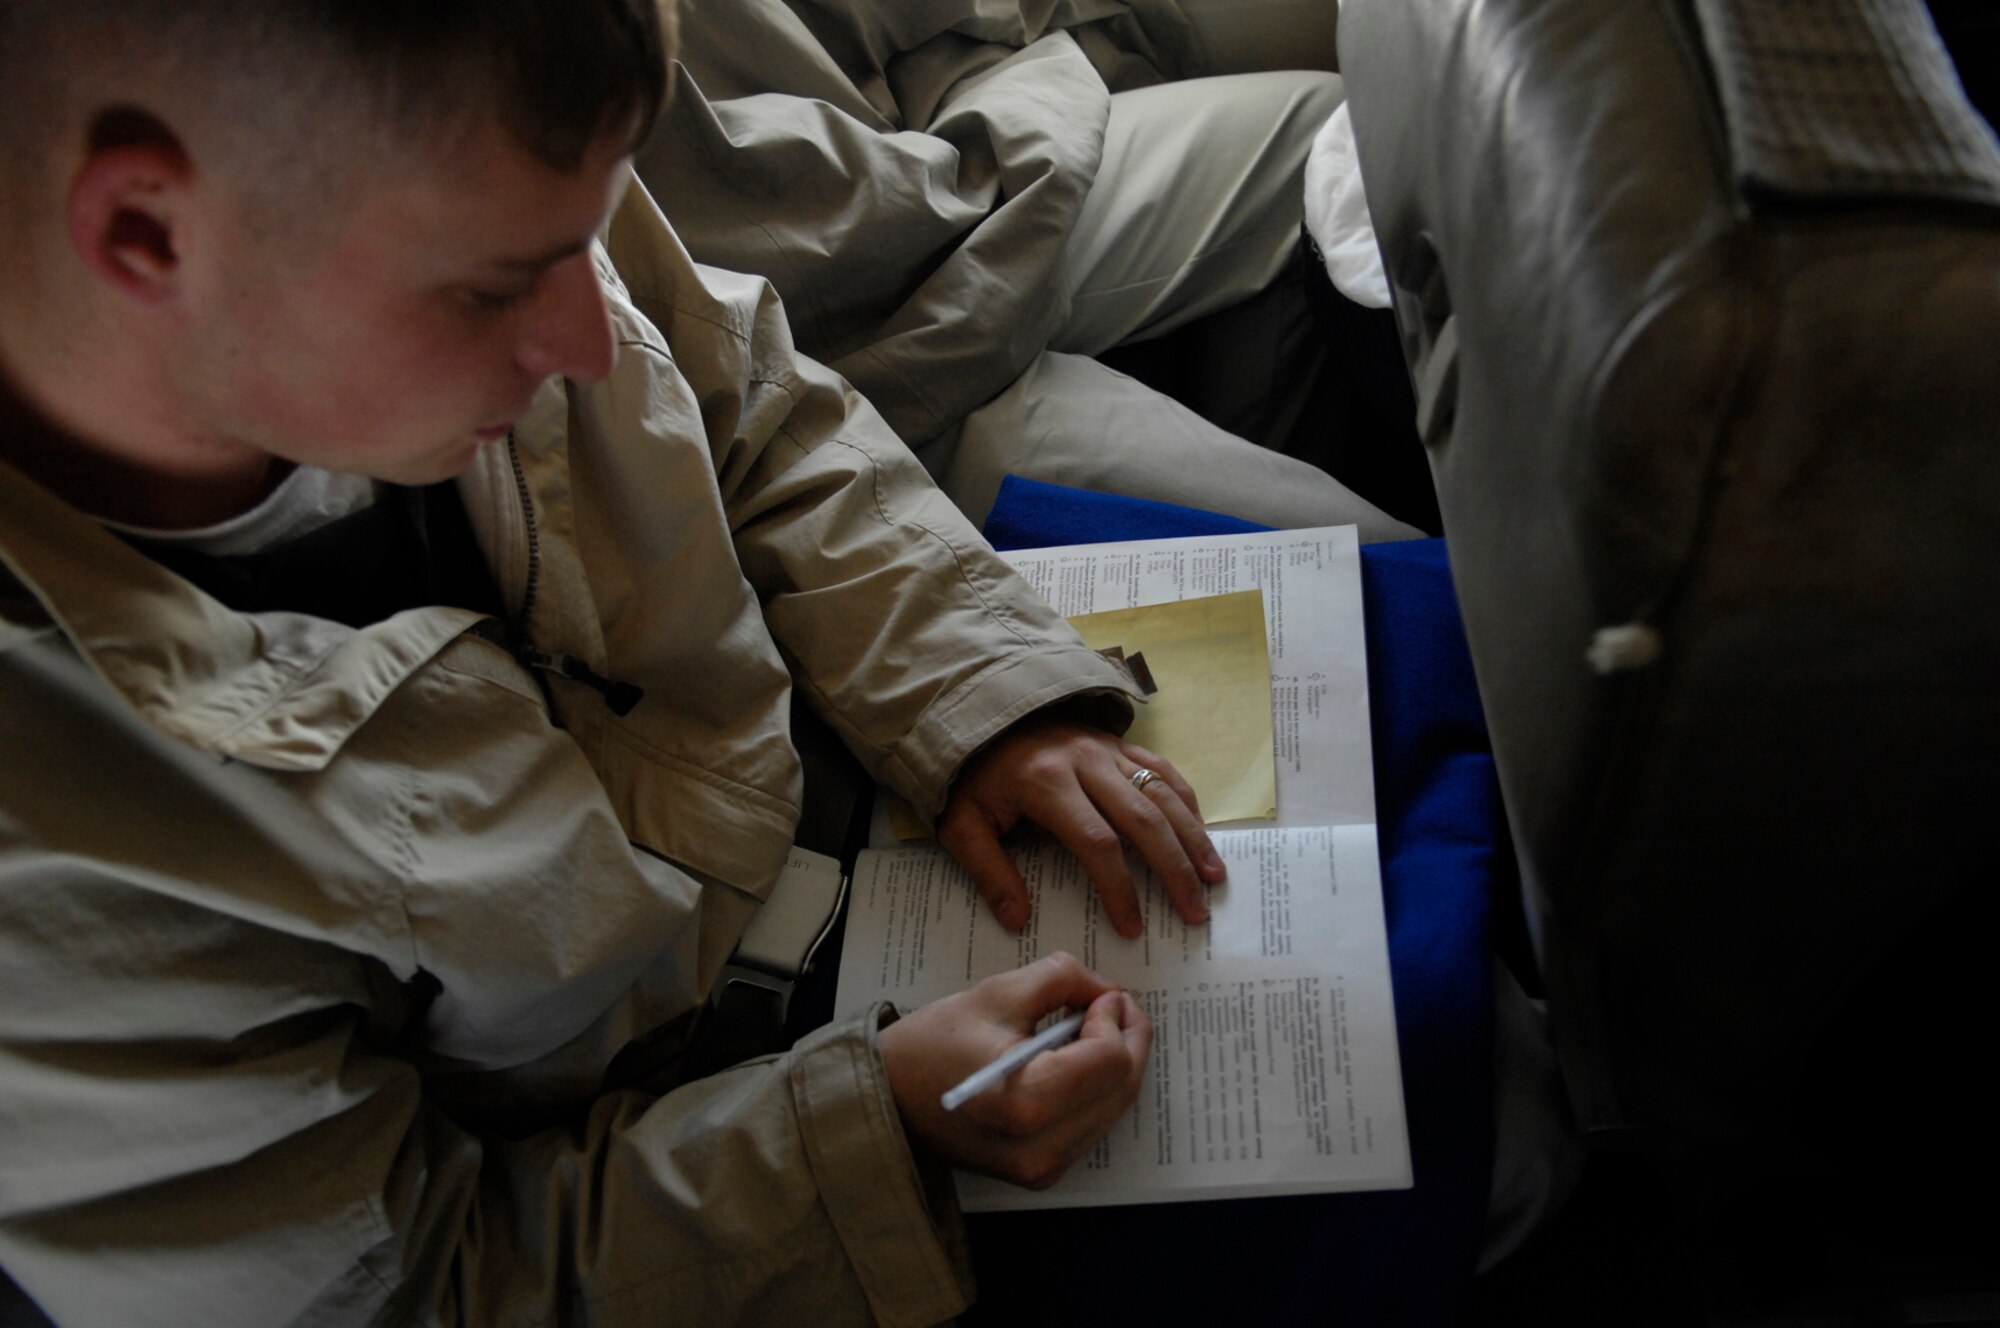 Senior Airman Raymond Testo, USAF Honor Guard Drill Team member, takes a practice test while studying for an upcoming WAPS test on a flight from Andrews AFB. Md., to Los Angeles, Calif., 15 April 2007.  The Drill Team is the traveling component of the Air Force Honor Guard and tours Air Force bases world wide showcasing the precision of today's Air Force to recruit, retain, and inspire Airmen for the Air Force mission. (U.S. Air Force photo by Senior Airman Daniel R. DeCook)(Released)